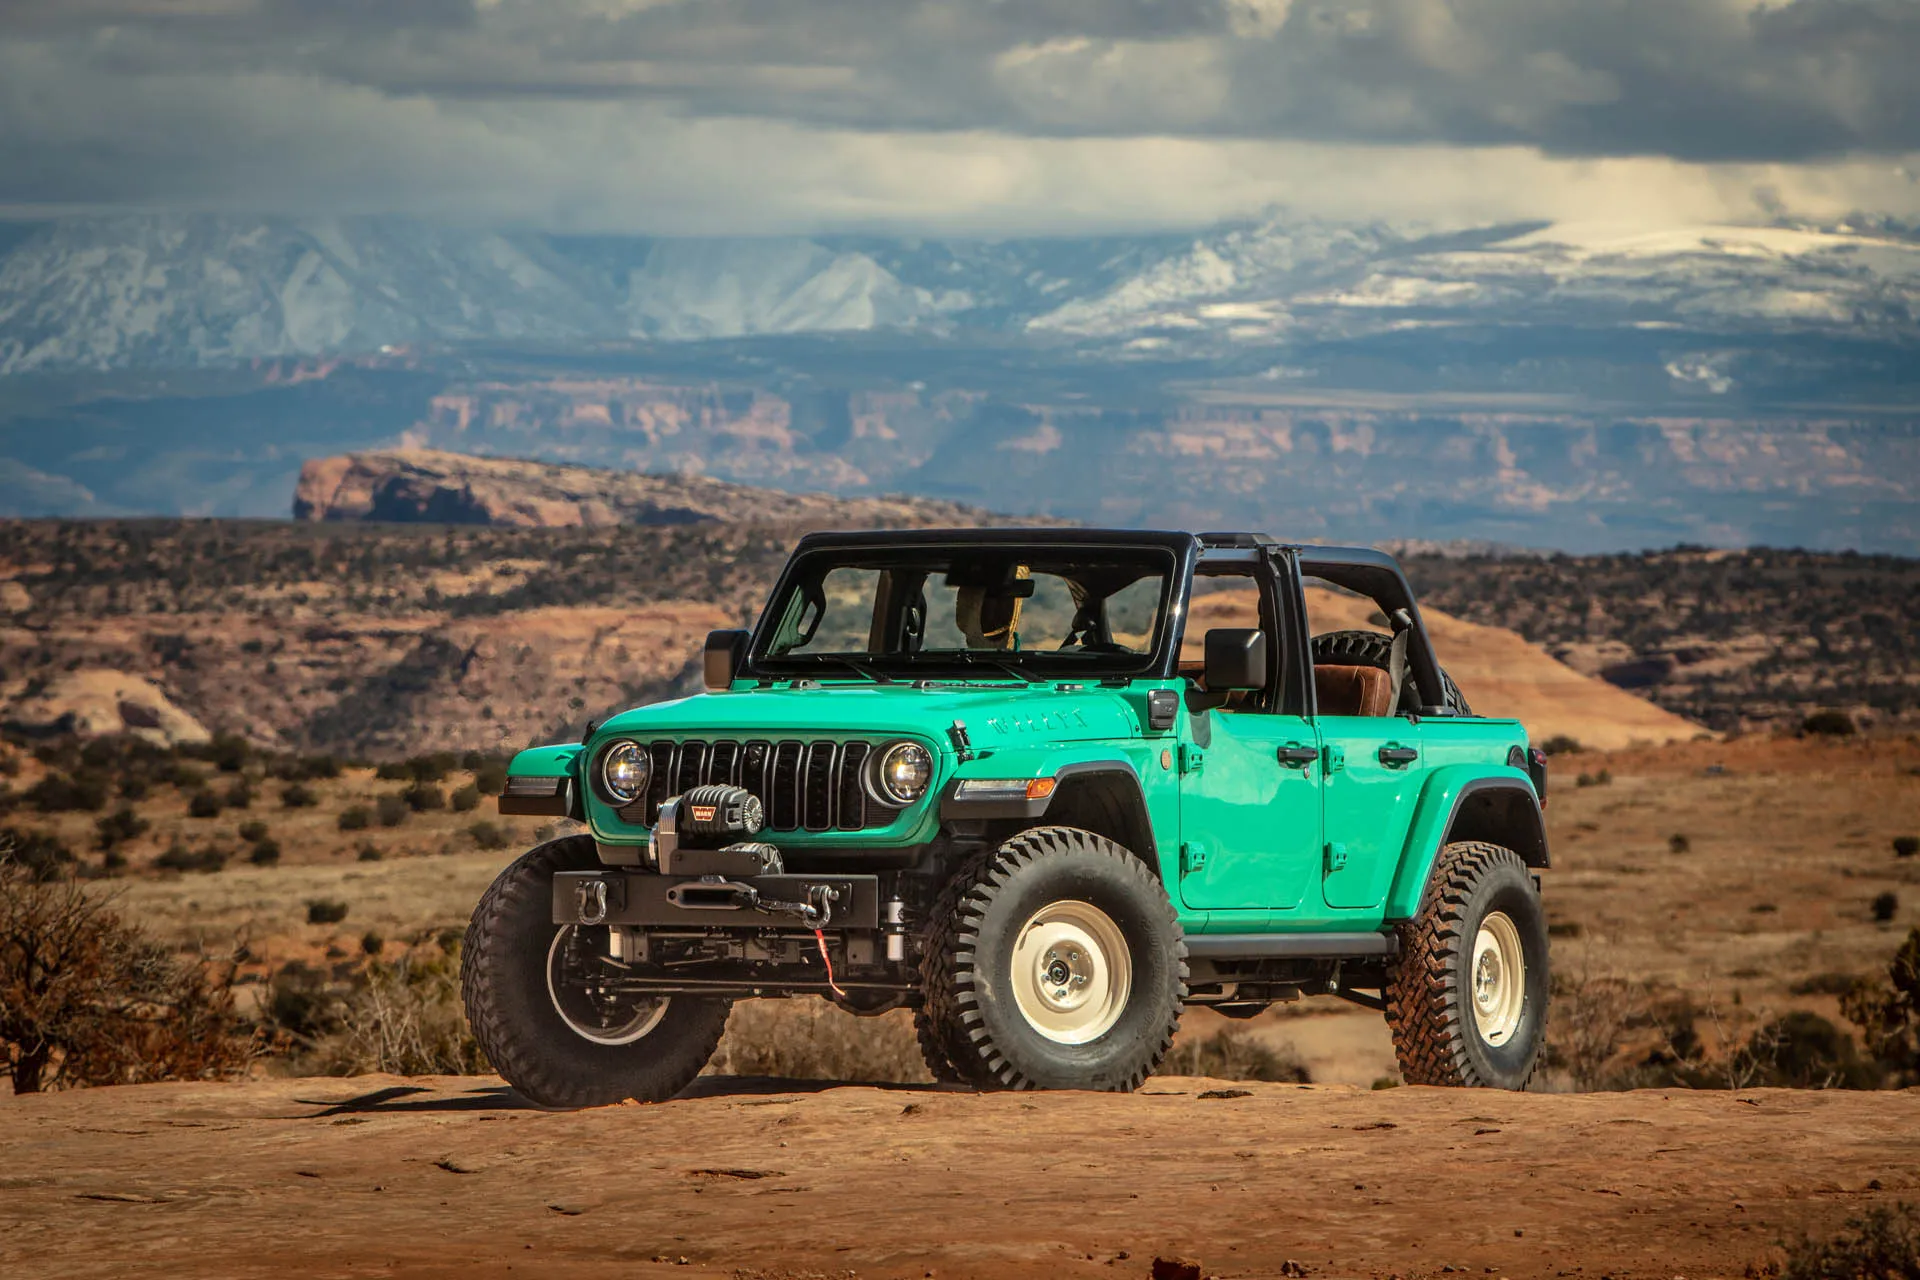 Jeep sidesteps EVs with ICE off-road concepts, points to PHEVs